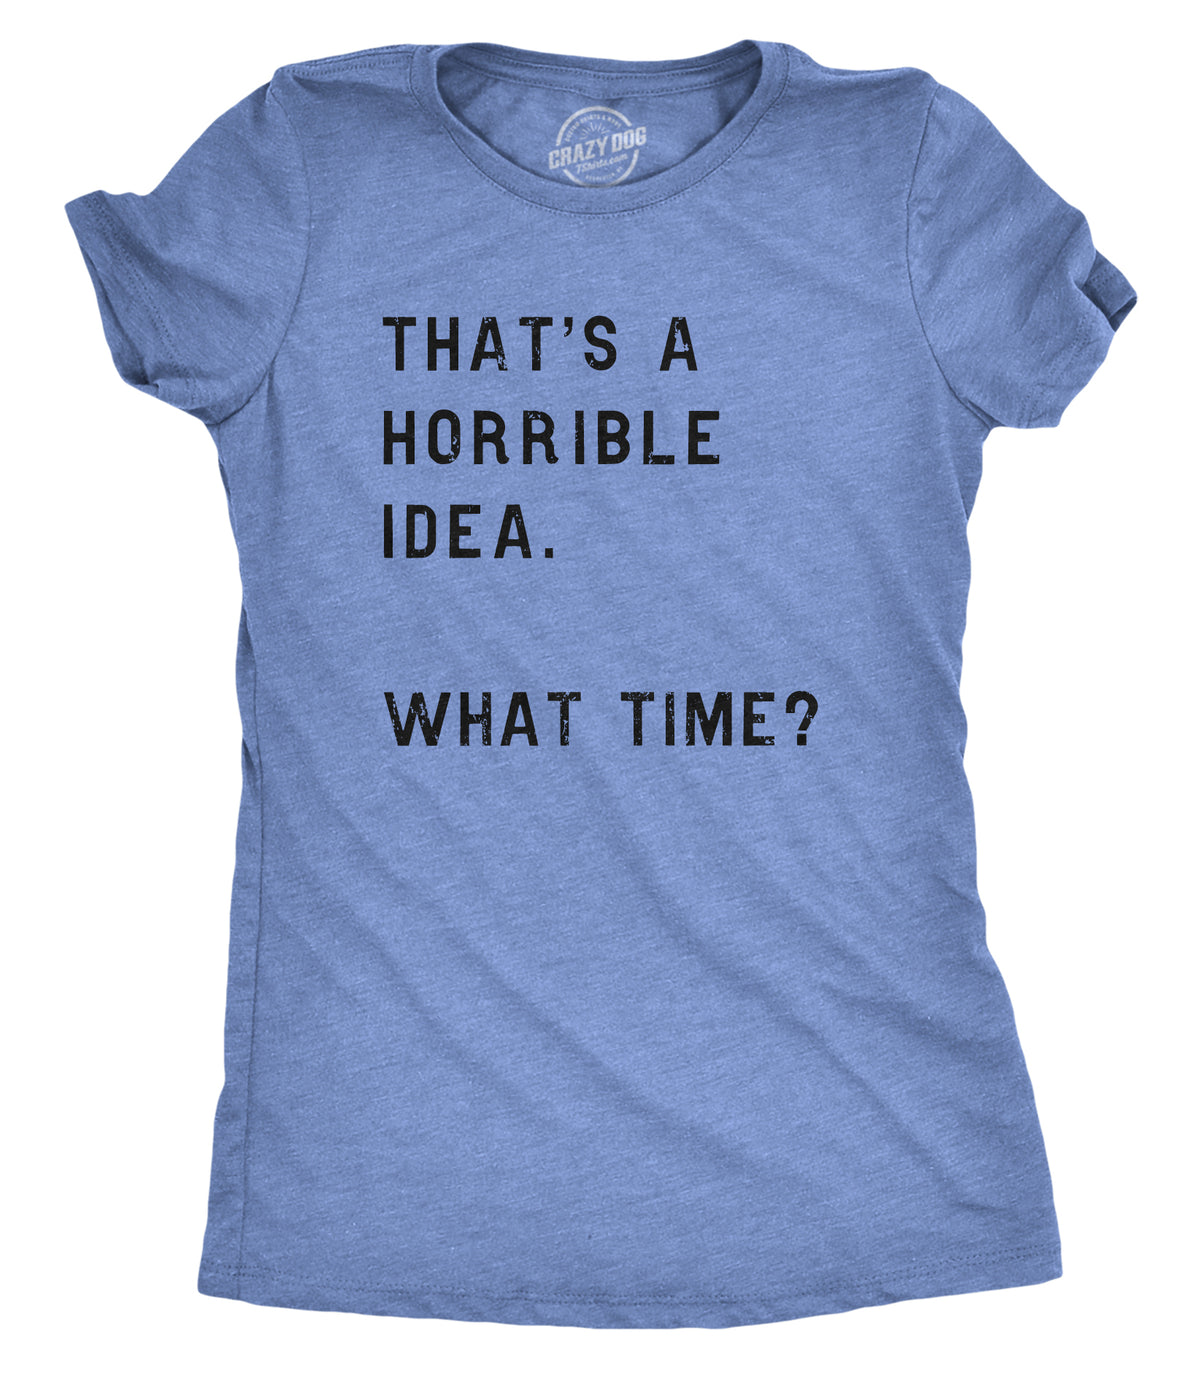 Funny Heather Light Blue That Sounds Like A Horrible Idea. What Time? Womens T Shirt Nerdy Sarcastic Tee